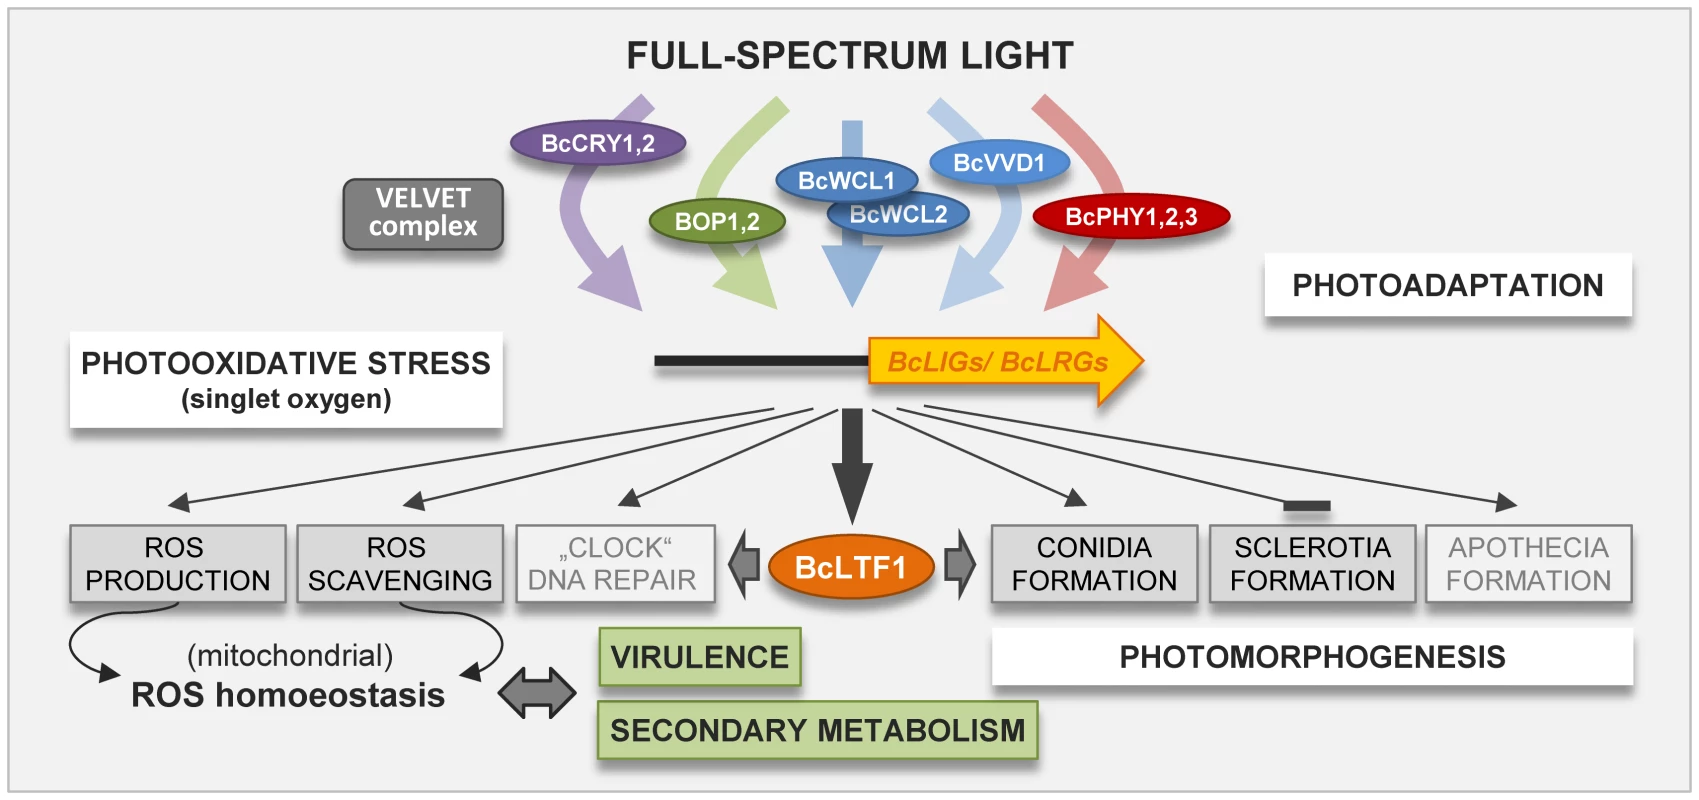 Photoresponses in <i>B. cinerea</i> are modulated by the light-responsive transcription factor BcLTF1.